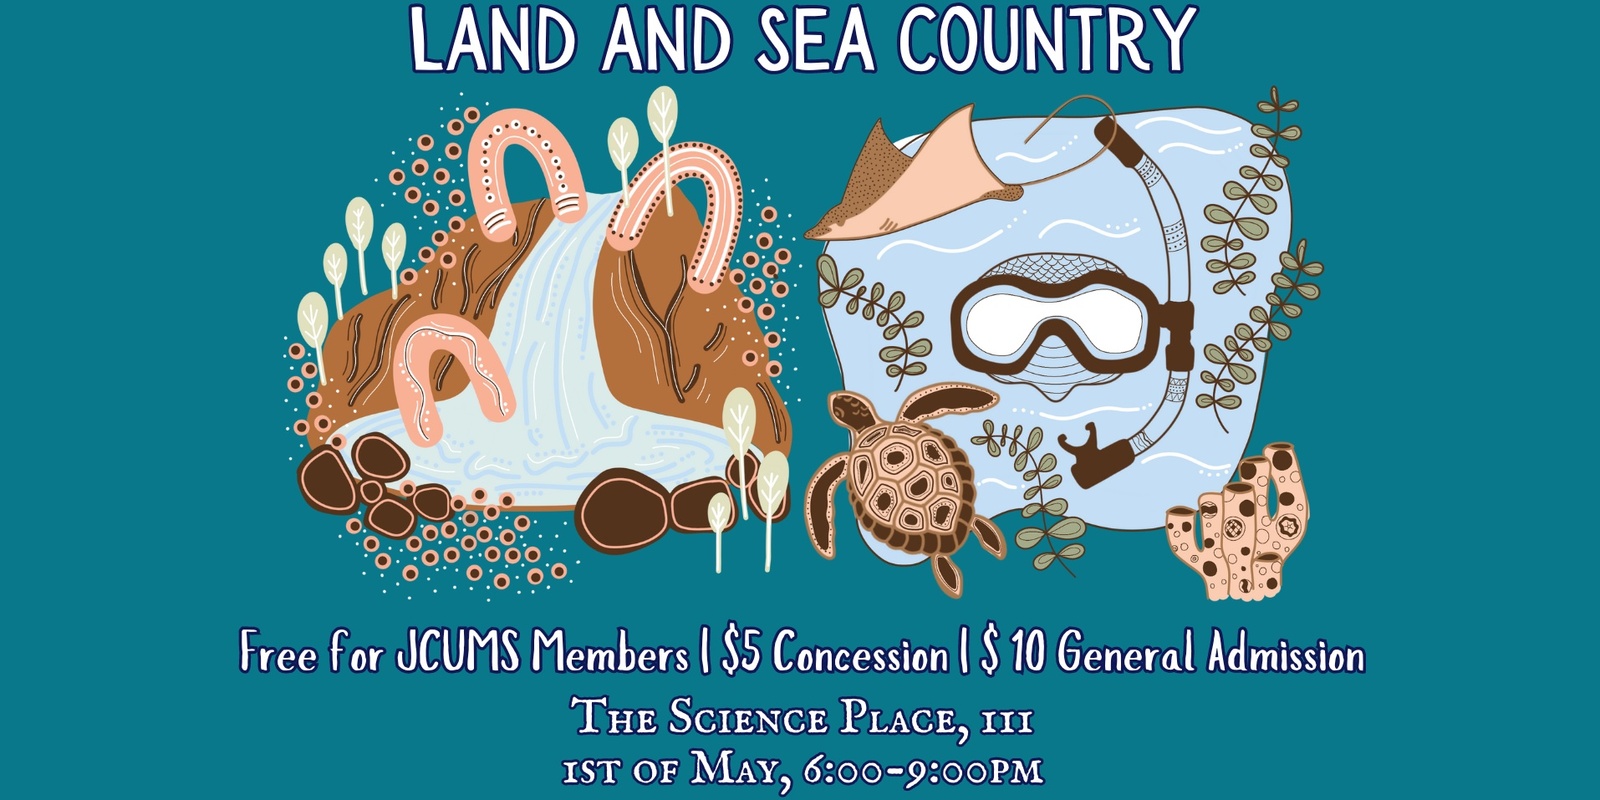 Banner image for Caring for Land and Sea Country